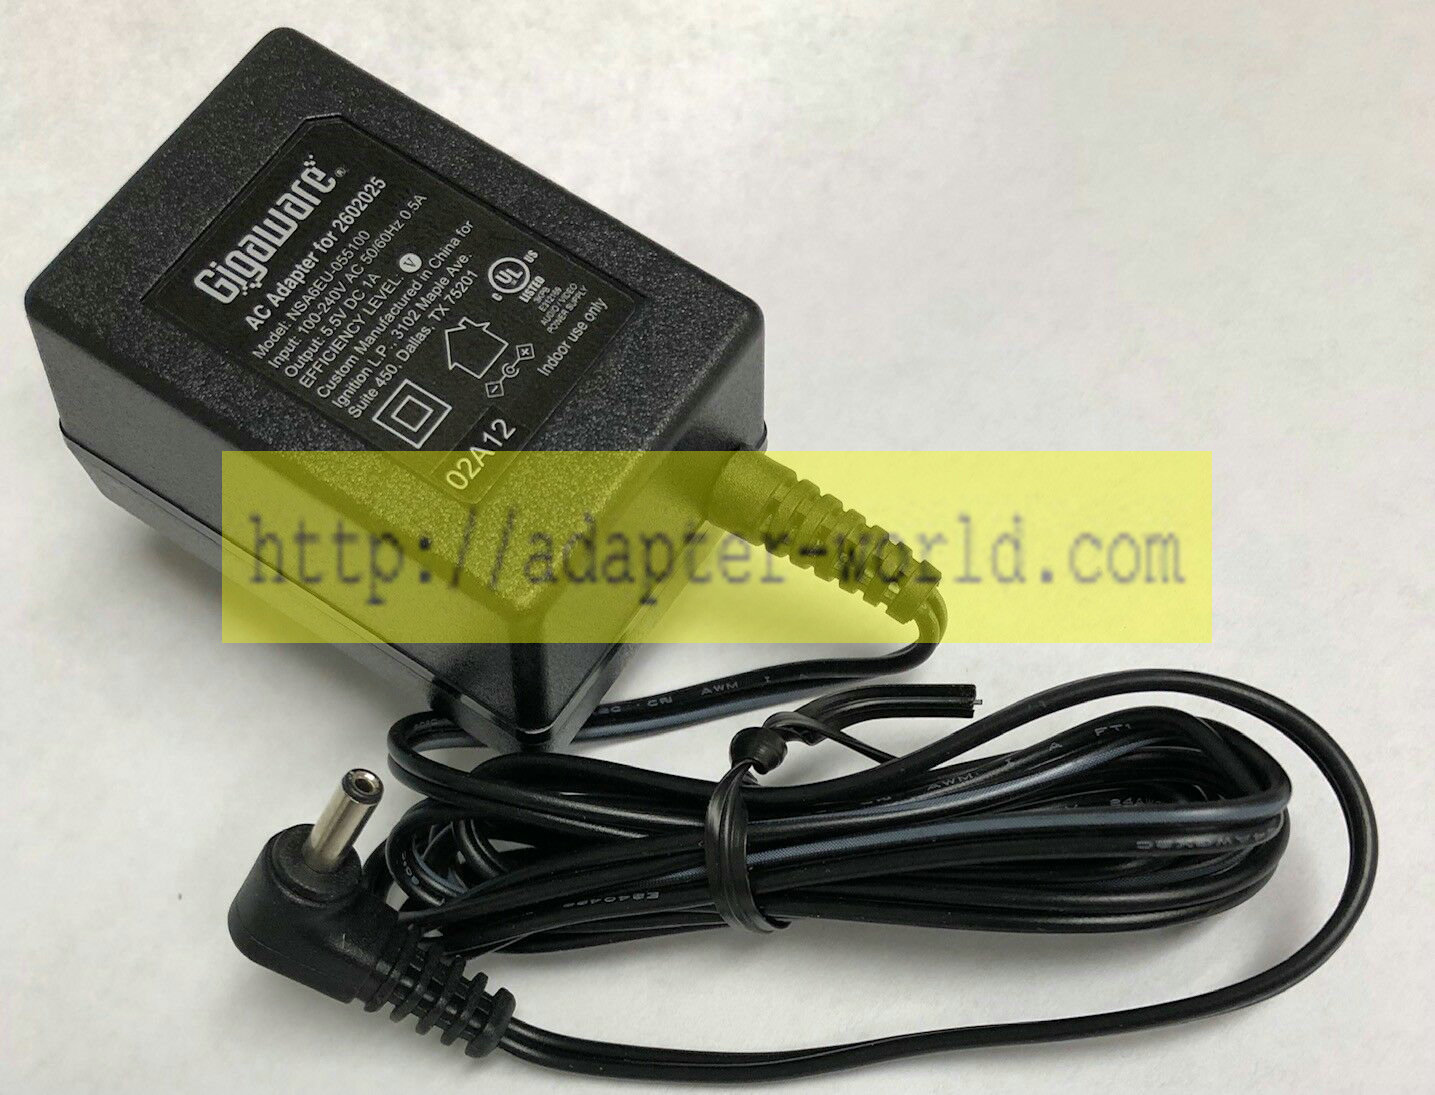 *Brand NEW*Gigaware DC 5.5V 1A AC DC Adapter NSA6EU-055100 Ac Adapter for 2602025 POWER SUPPLY